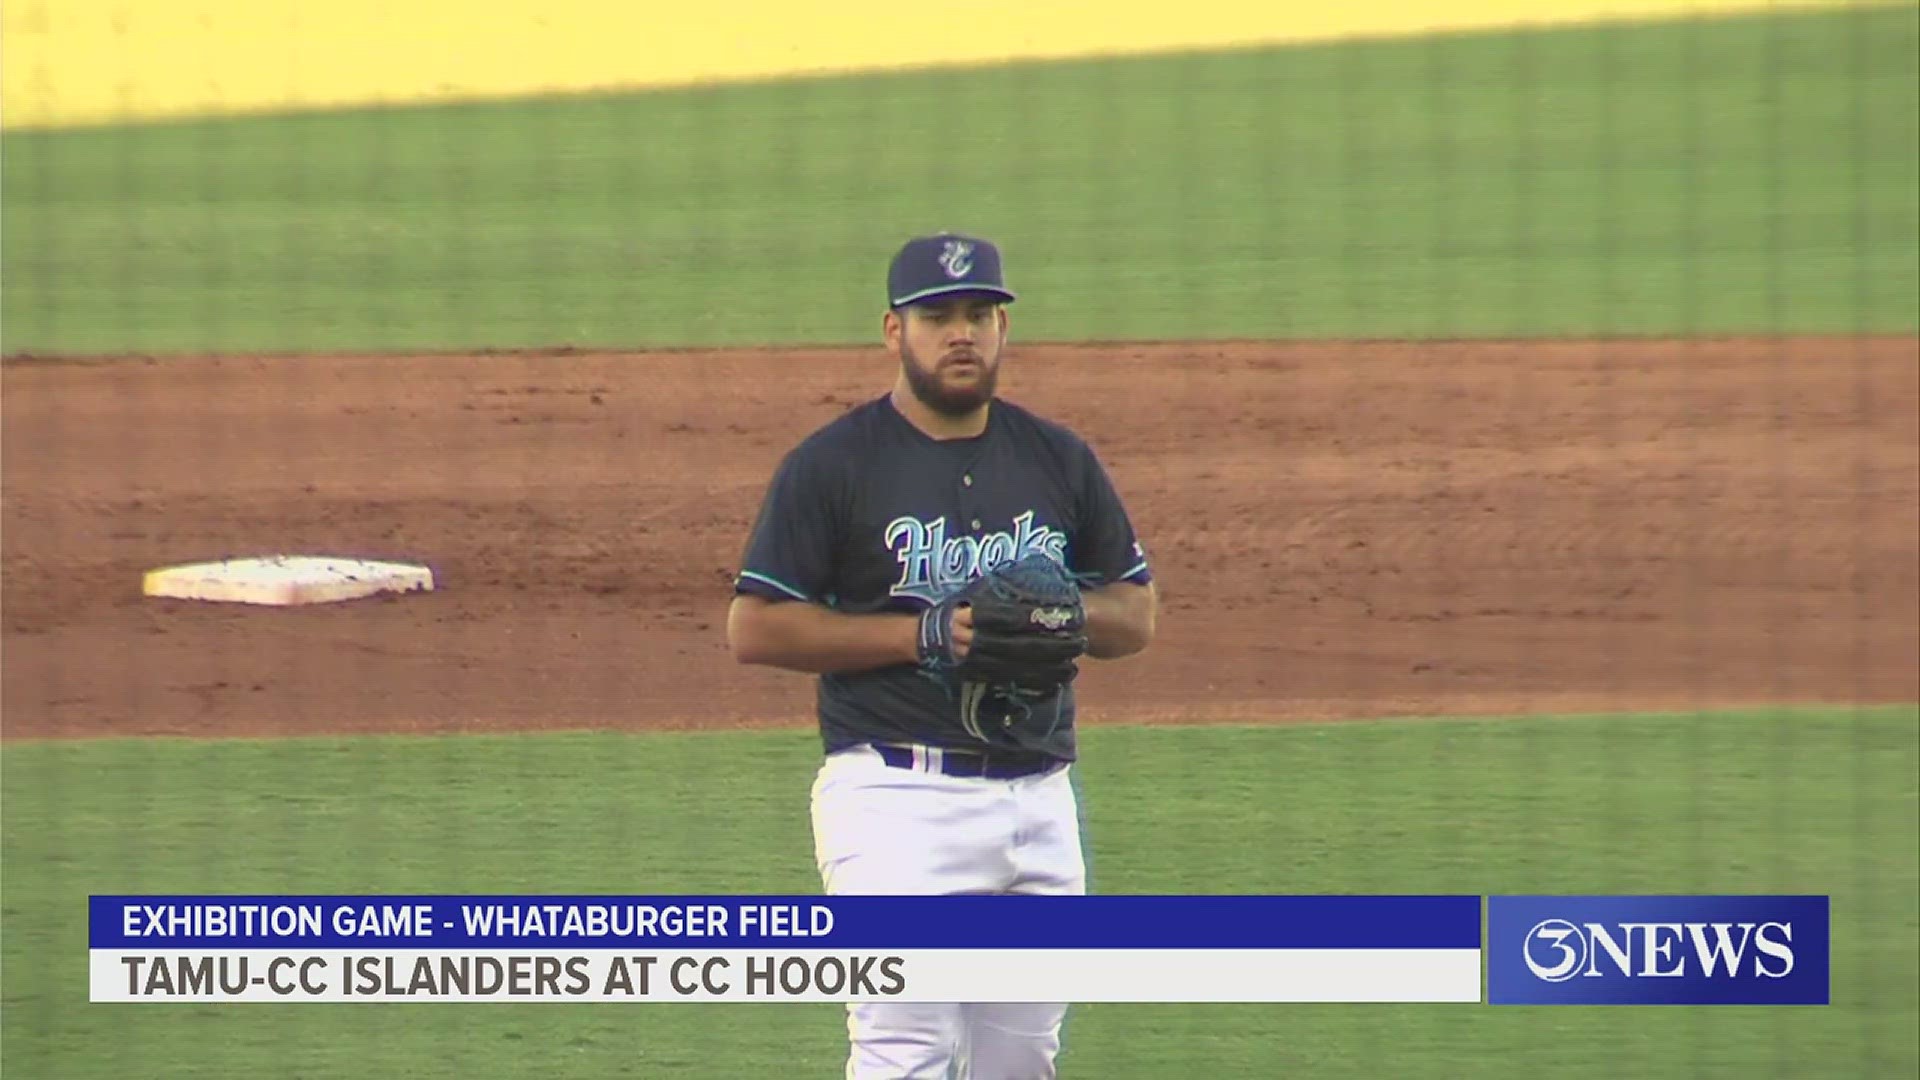 The Hooks got some solid pitching performances and a grand slam from Ryan Wrobleski in the win over Texas A&M-Corpus Christi.